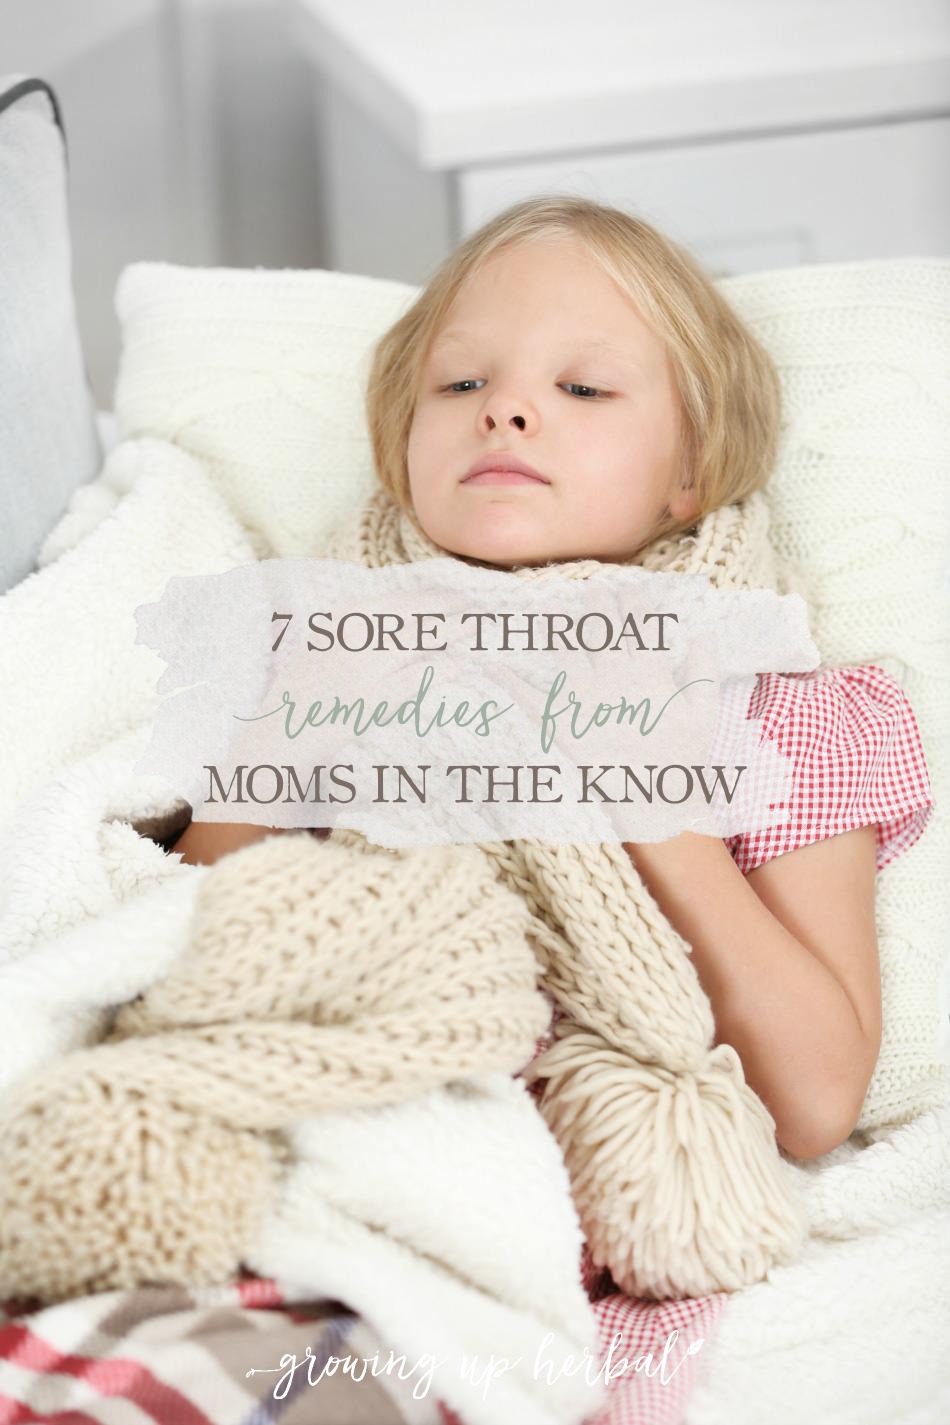 7 Sore Throat Remedies From Moms In The Know | Growing Up Herbal | Seven experienced moms share their go-to sore throat remedies!